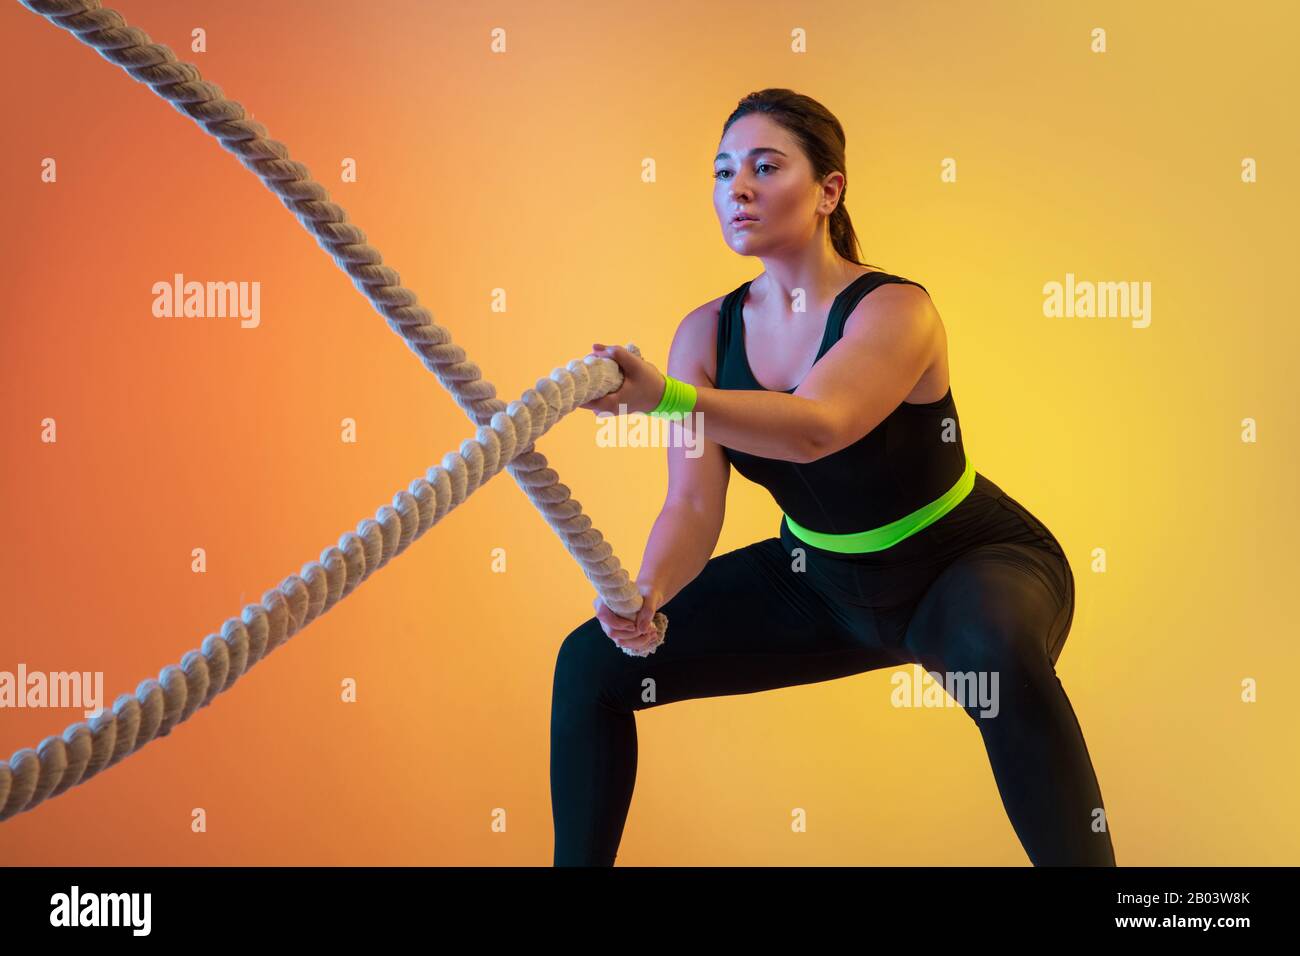 Female Athlete Performing Upper-body Workout on Fitness Equipment Stock  Photo - Image of athletic, fitness: 251611116